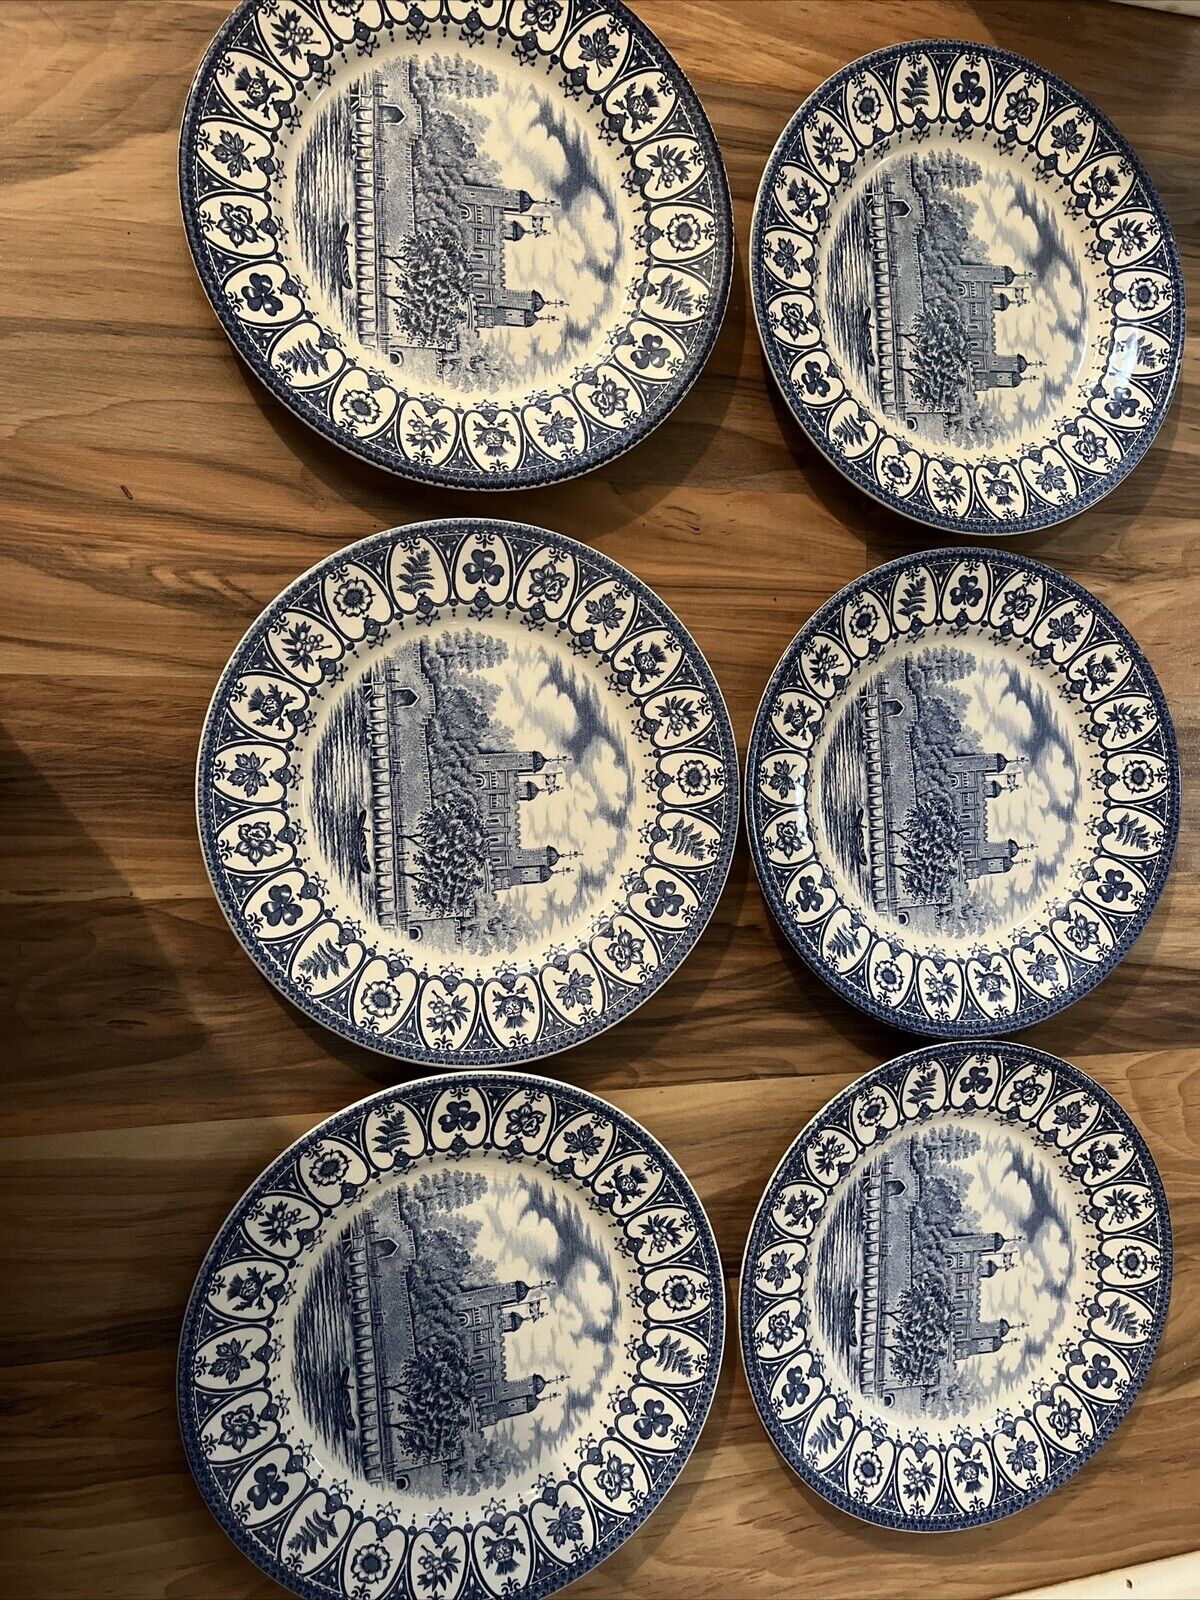 1977 Queen Elizabeth silver jubilee plates, blue and white, 9 1/2 inches long.